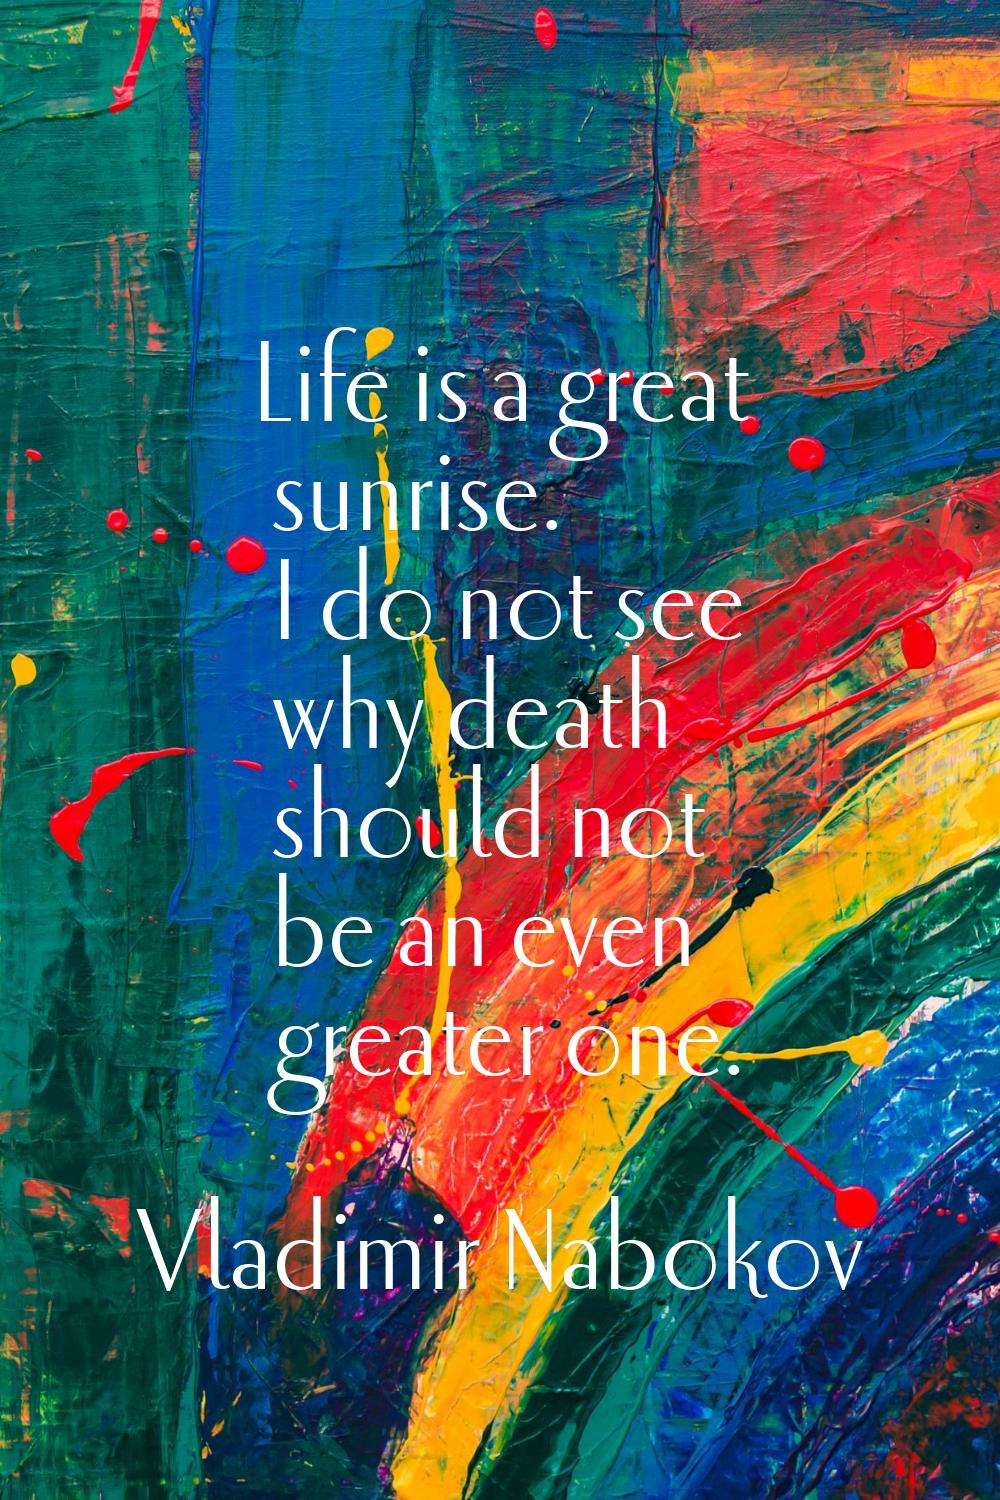 Life is a great sunrise. I do not see why death should not be an even greater one.